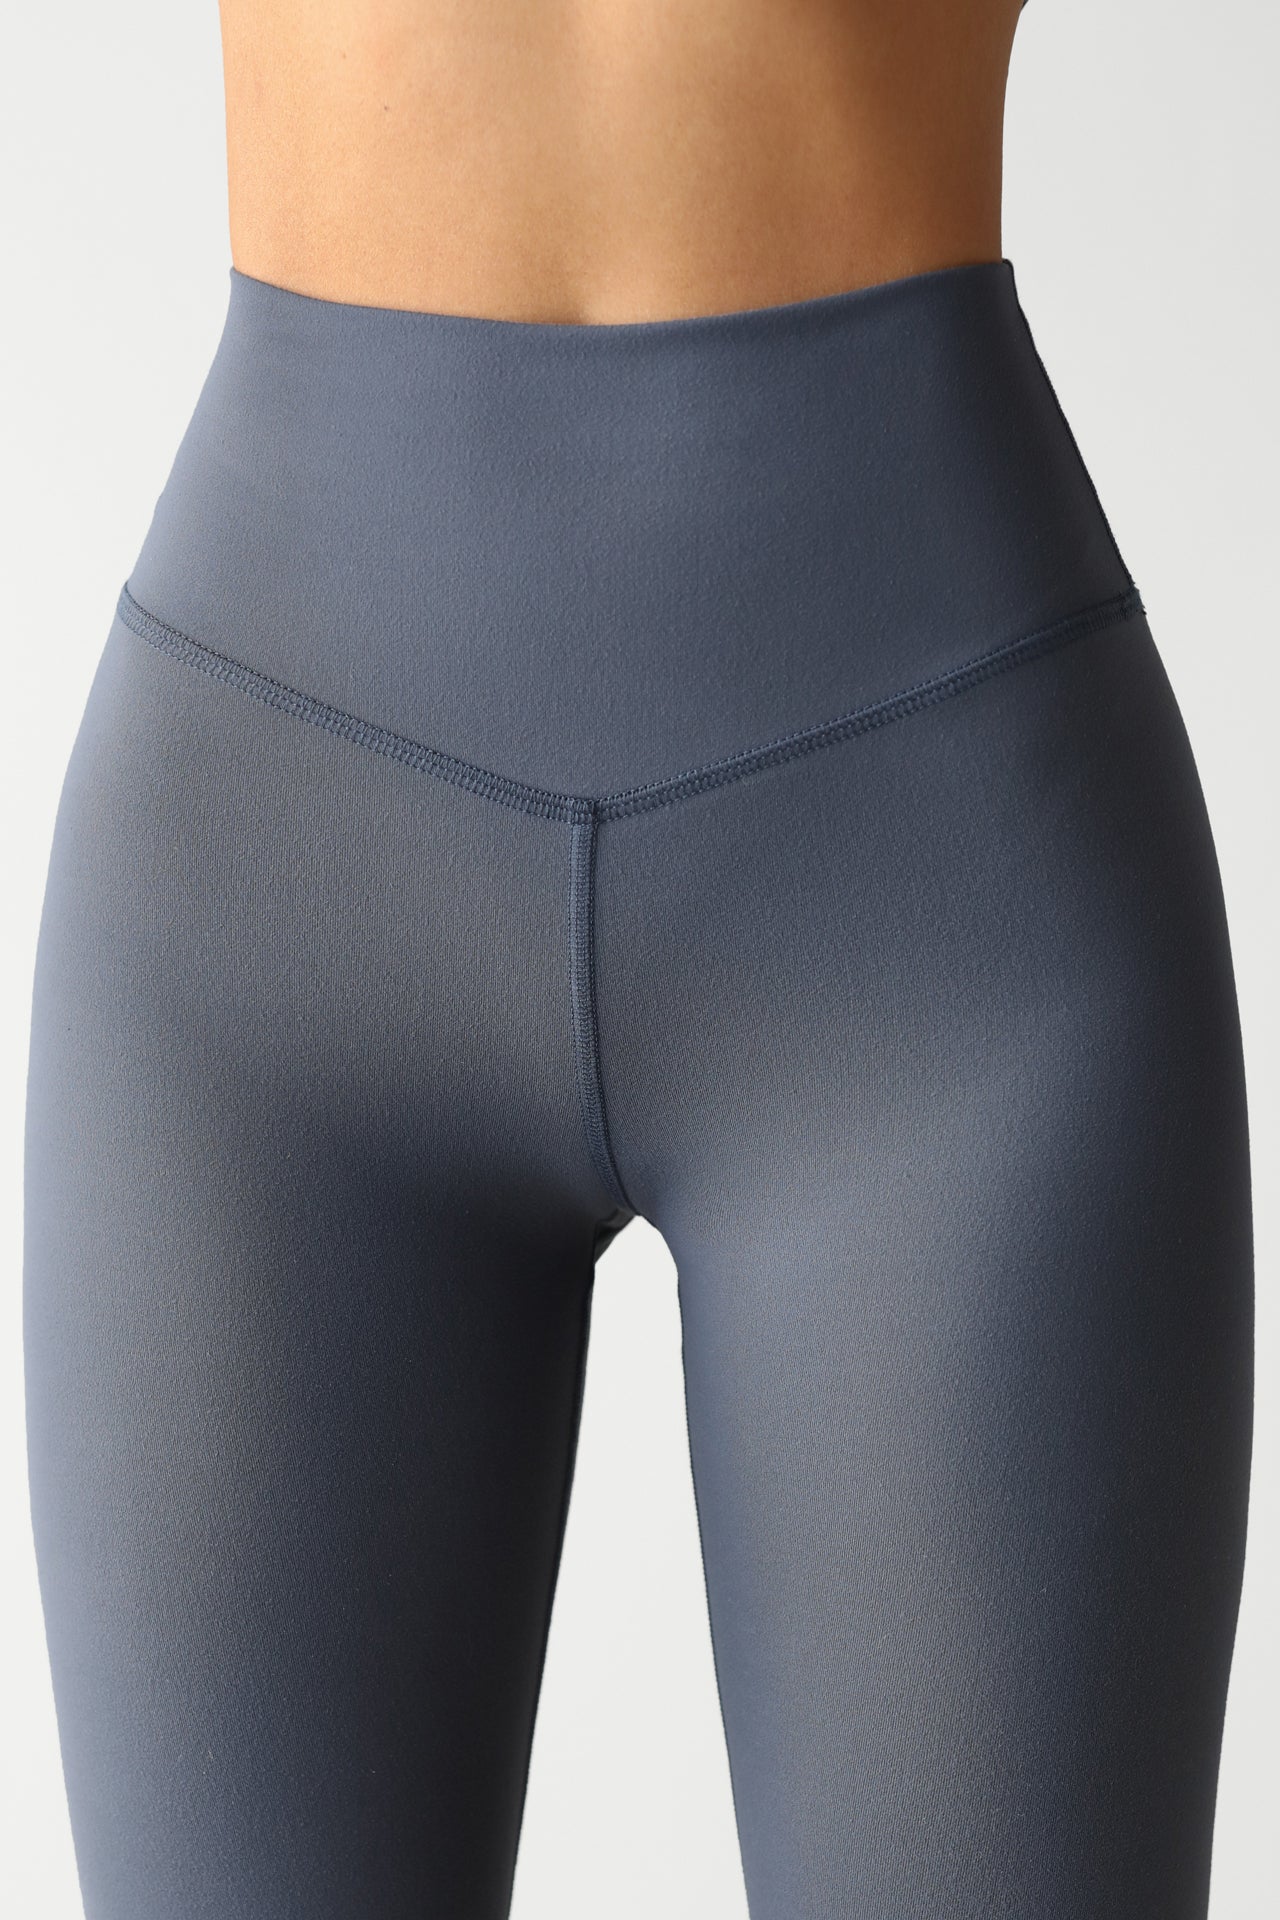 Close up detail front view of model from the waist down posing the full length and high-waisted sueded navy Second Skin Legging with a wide, v-shaped waistband